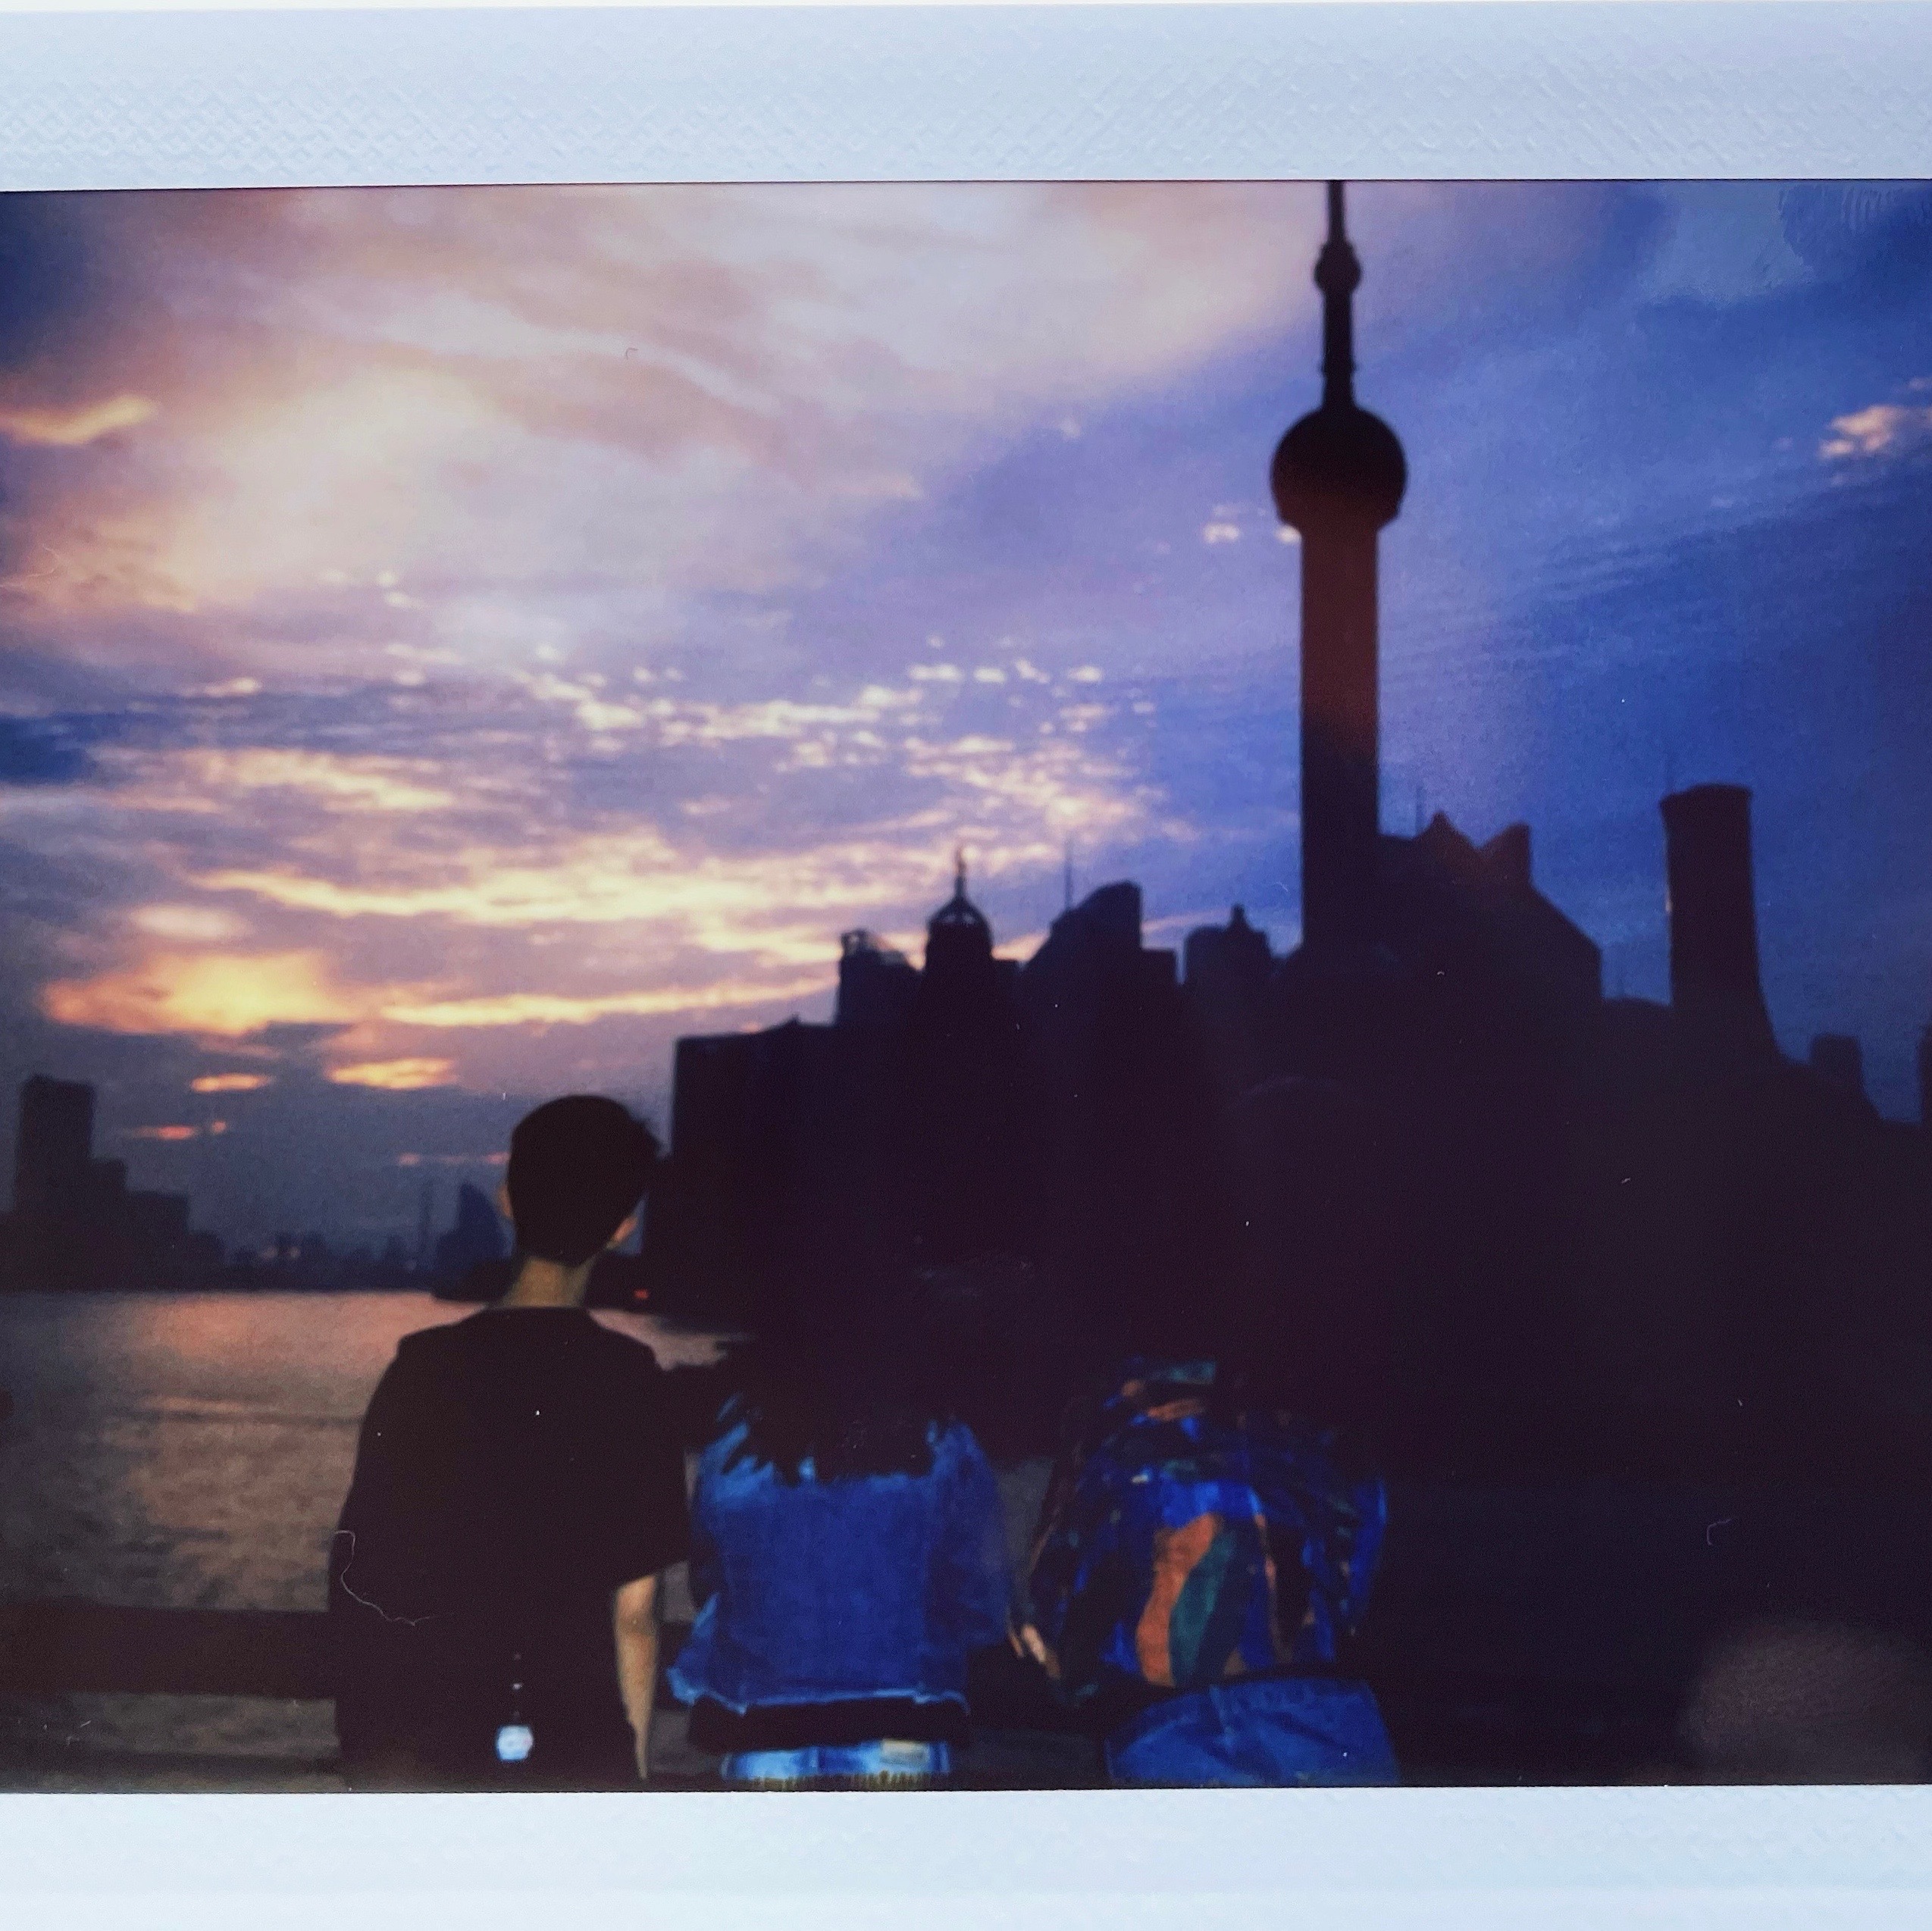 Me watching sunrise at the Bund in front of Oriental Pearl Tower